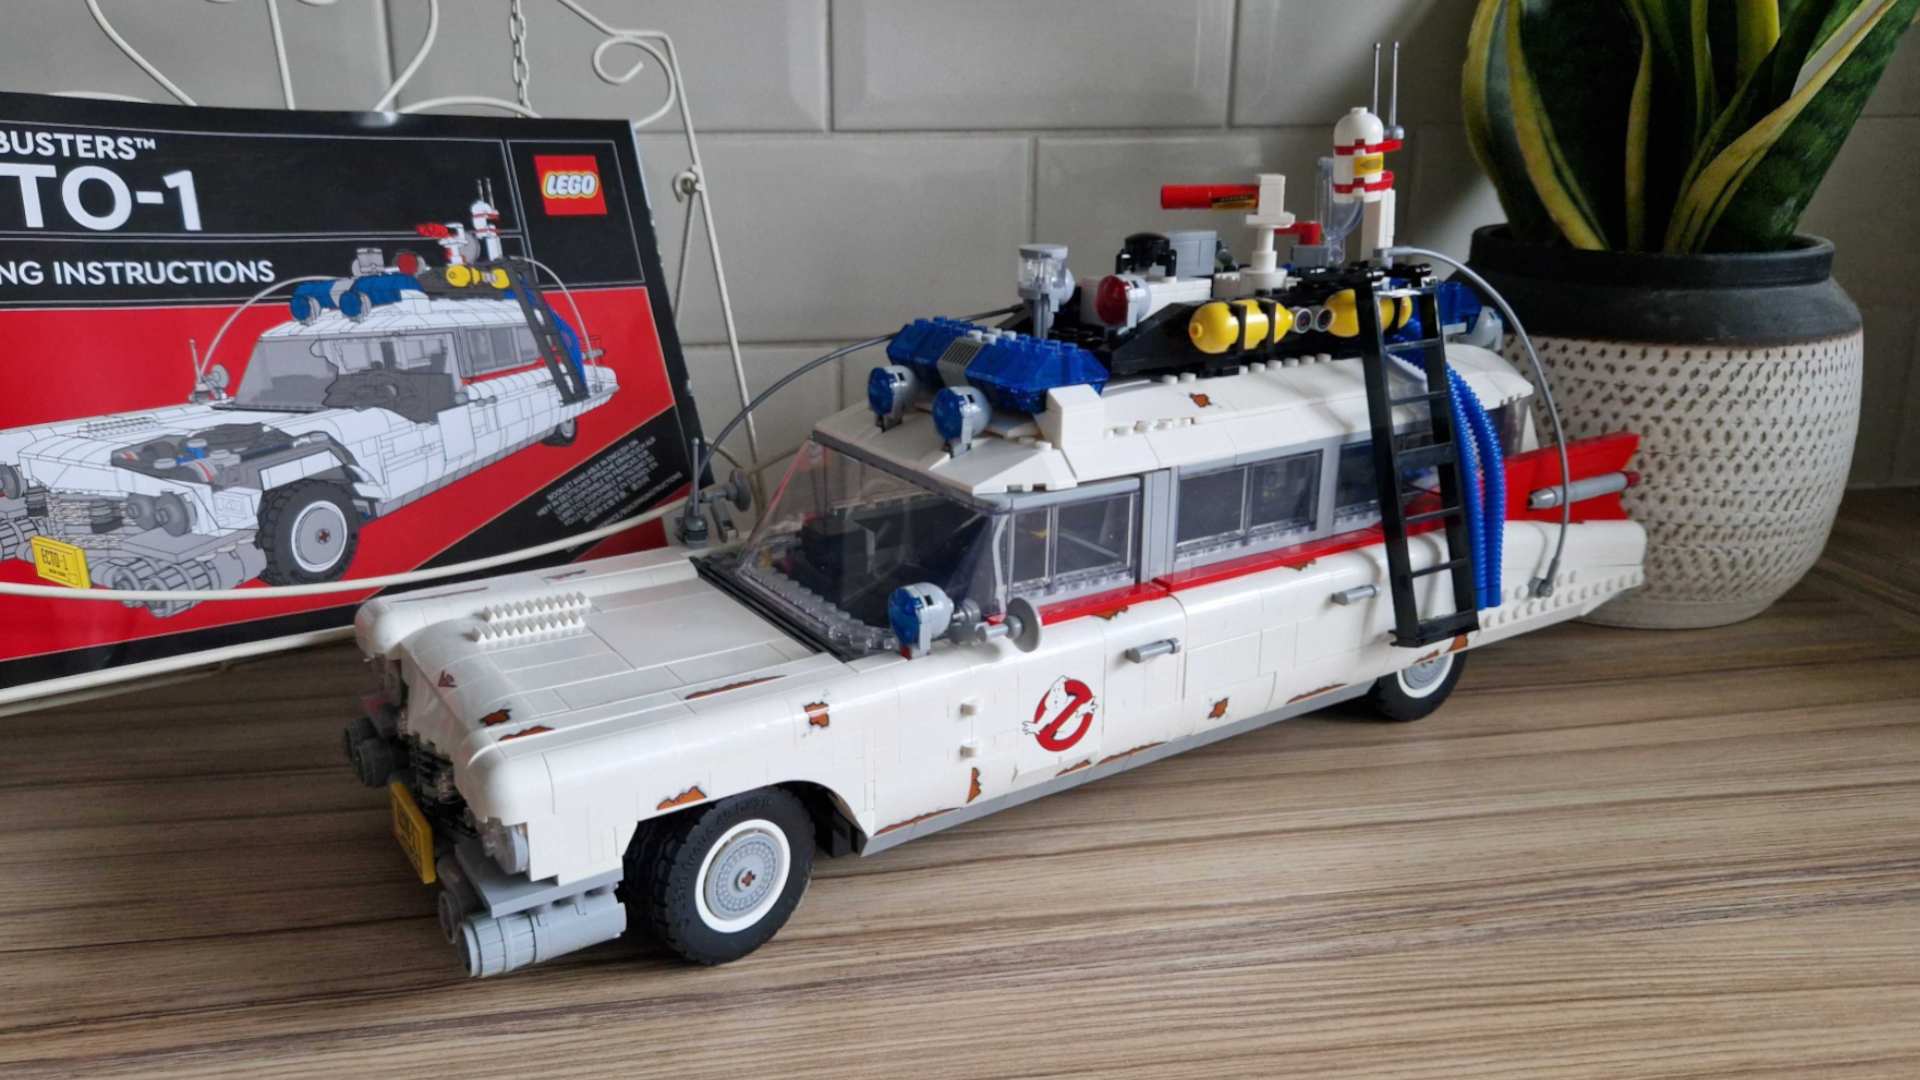 Lego Ghostbusters ECTO-1 review